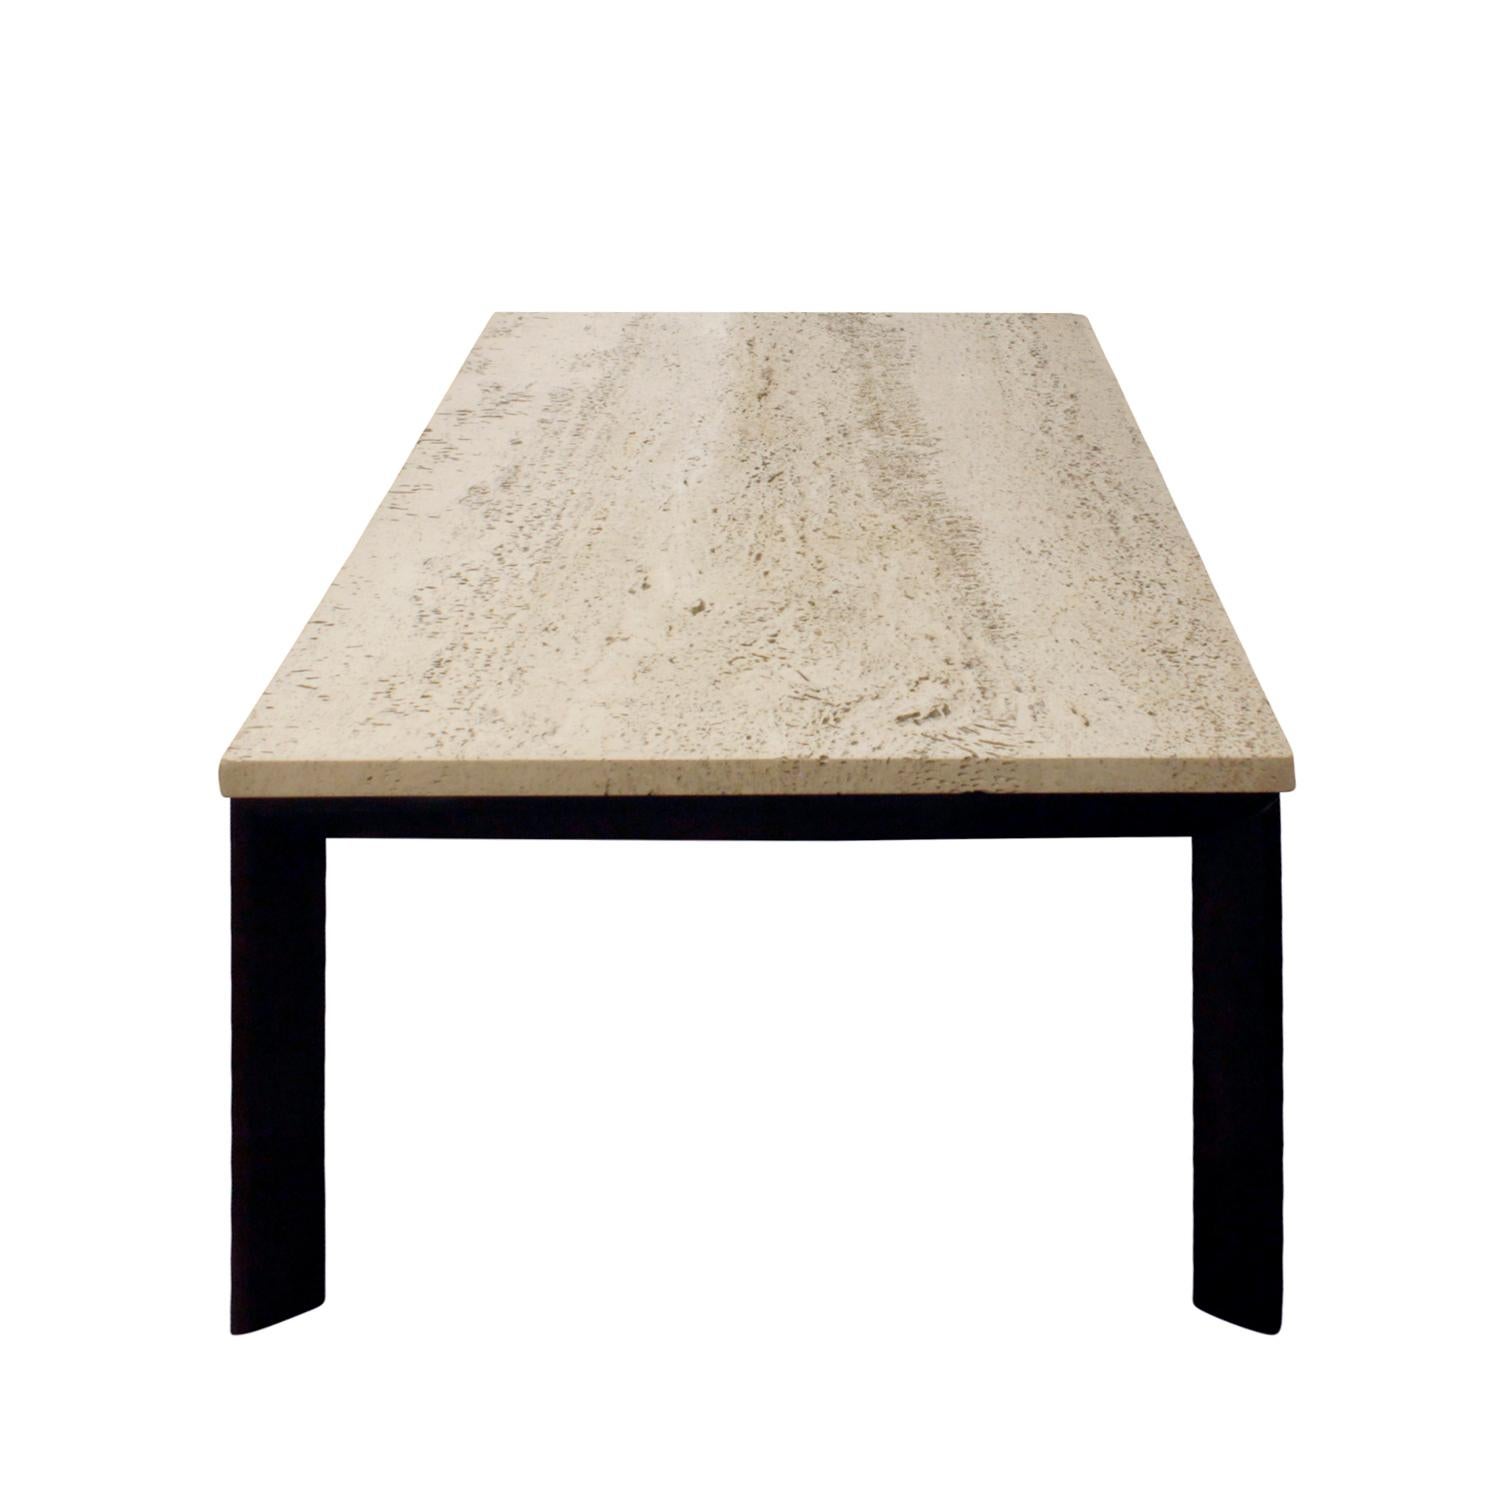 Hand-Crafted Pair of Angular Leg Coffee Tables with Travertine Tops, 1950s For Sale